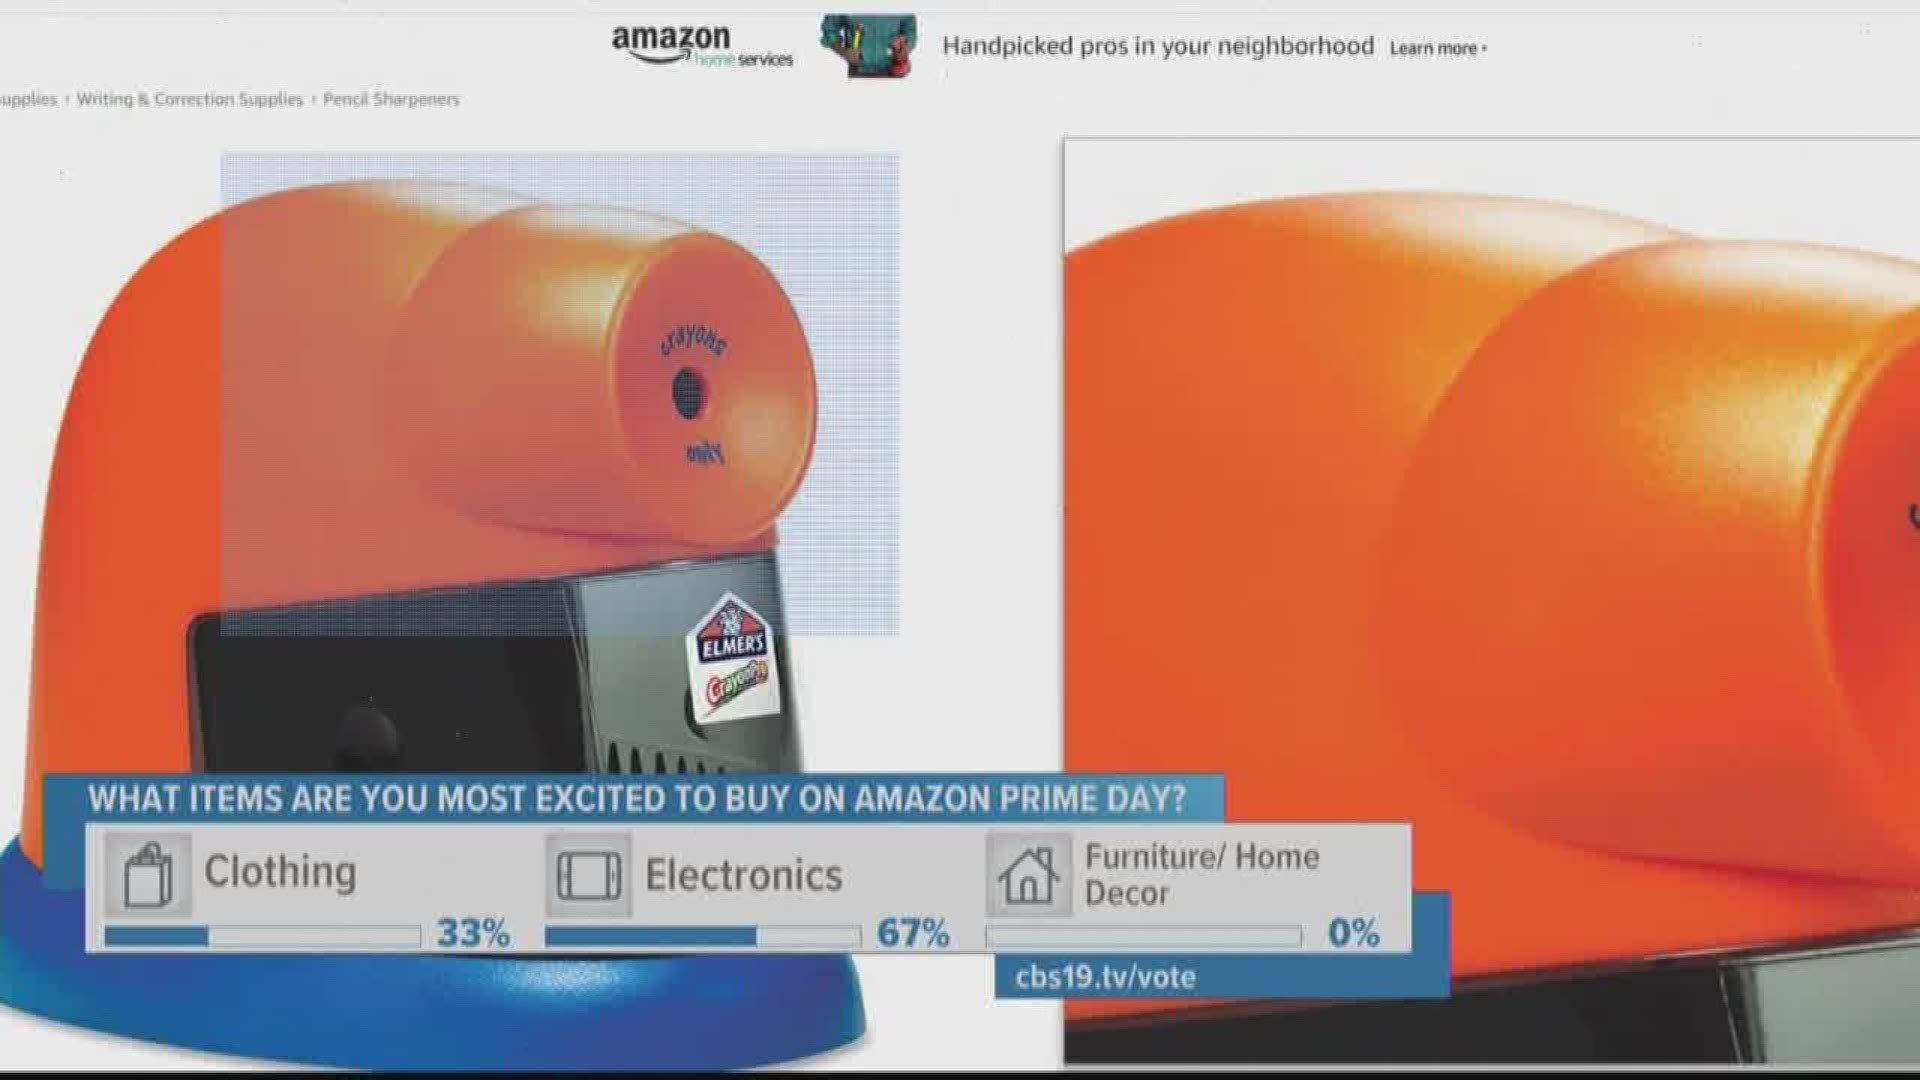 Starting at 2 p.m. today you can take part in Amazon Prime Day!